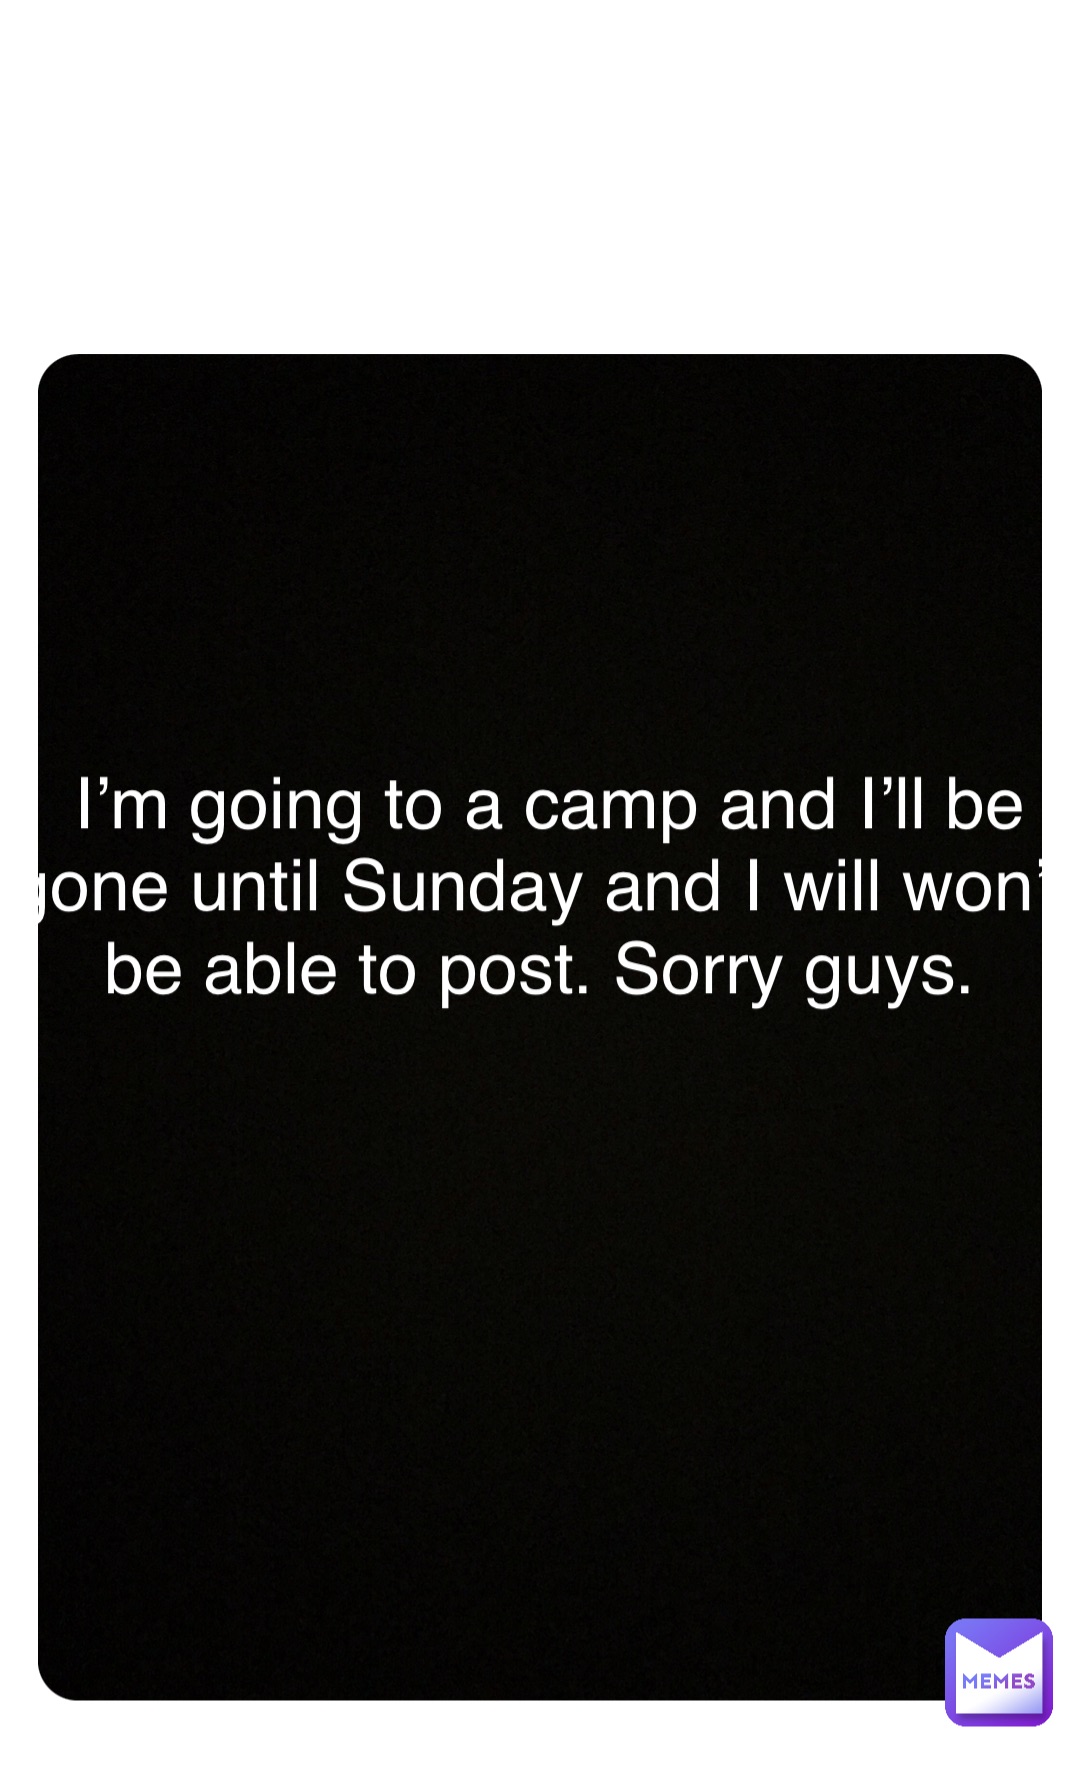 Double tap to edit I’m going to a camp and I’ll be gone until Sunday and I will won’t be able to post. Sorry guys.